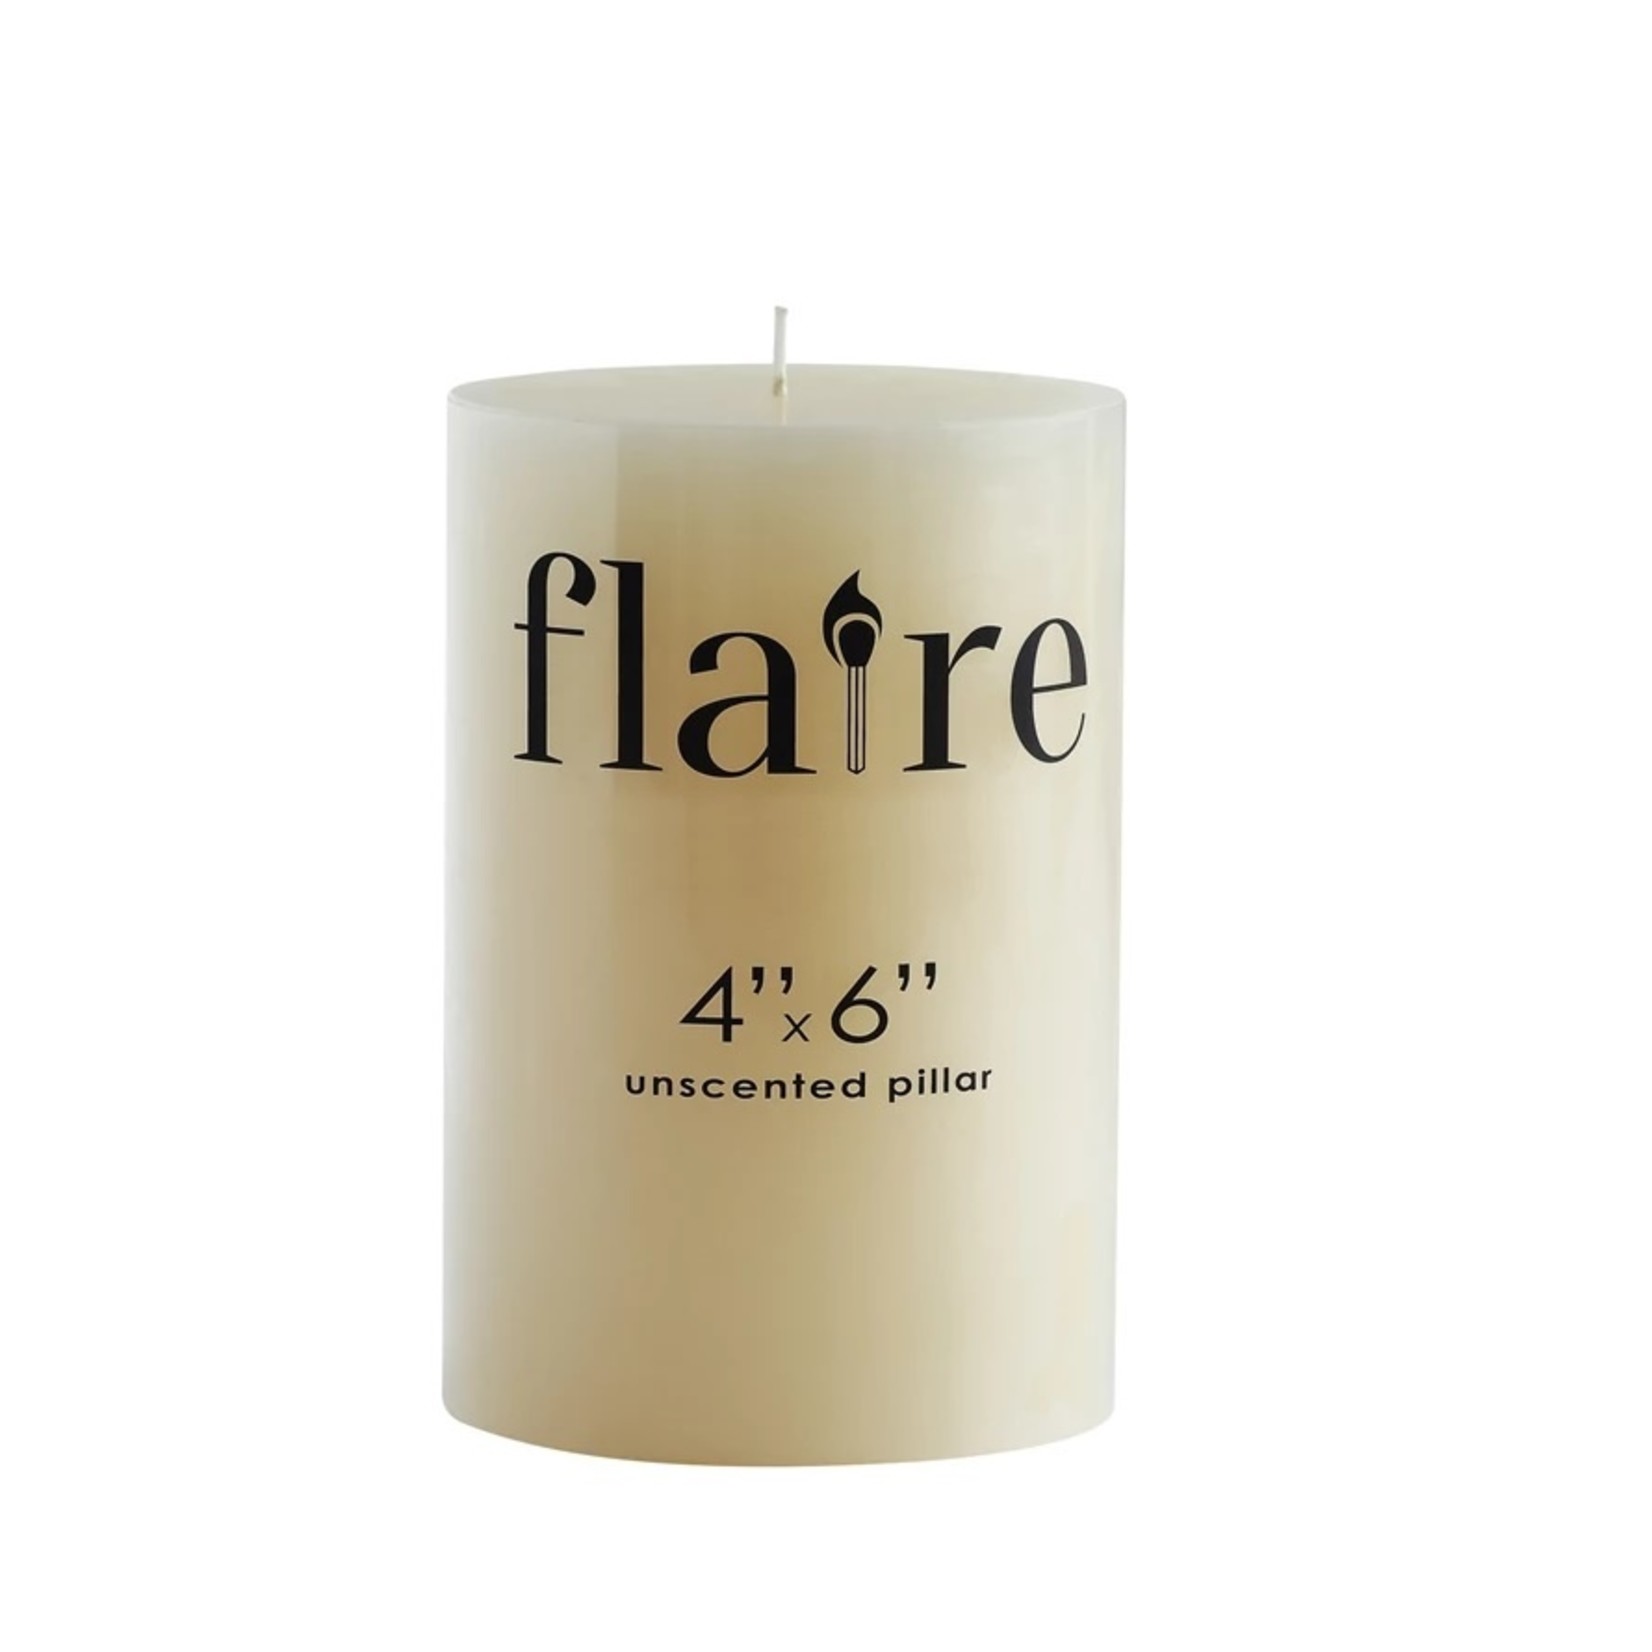 CC UNSCENTED PILLAR FLAIRE CANDLE